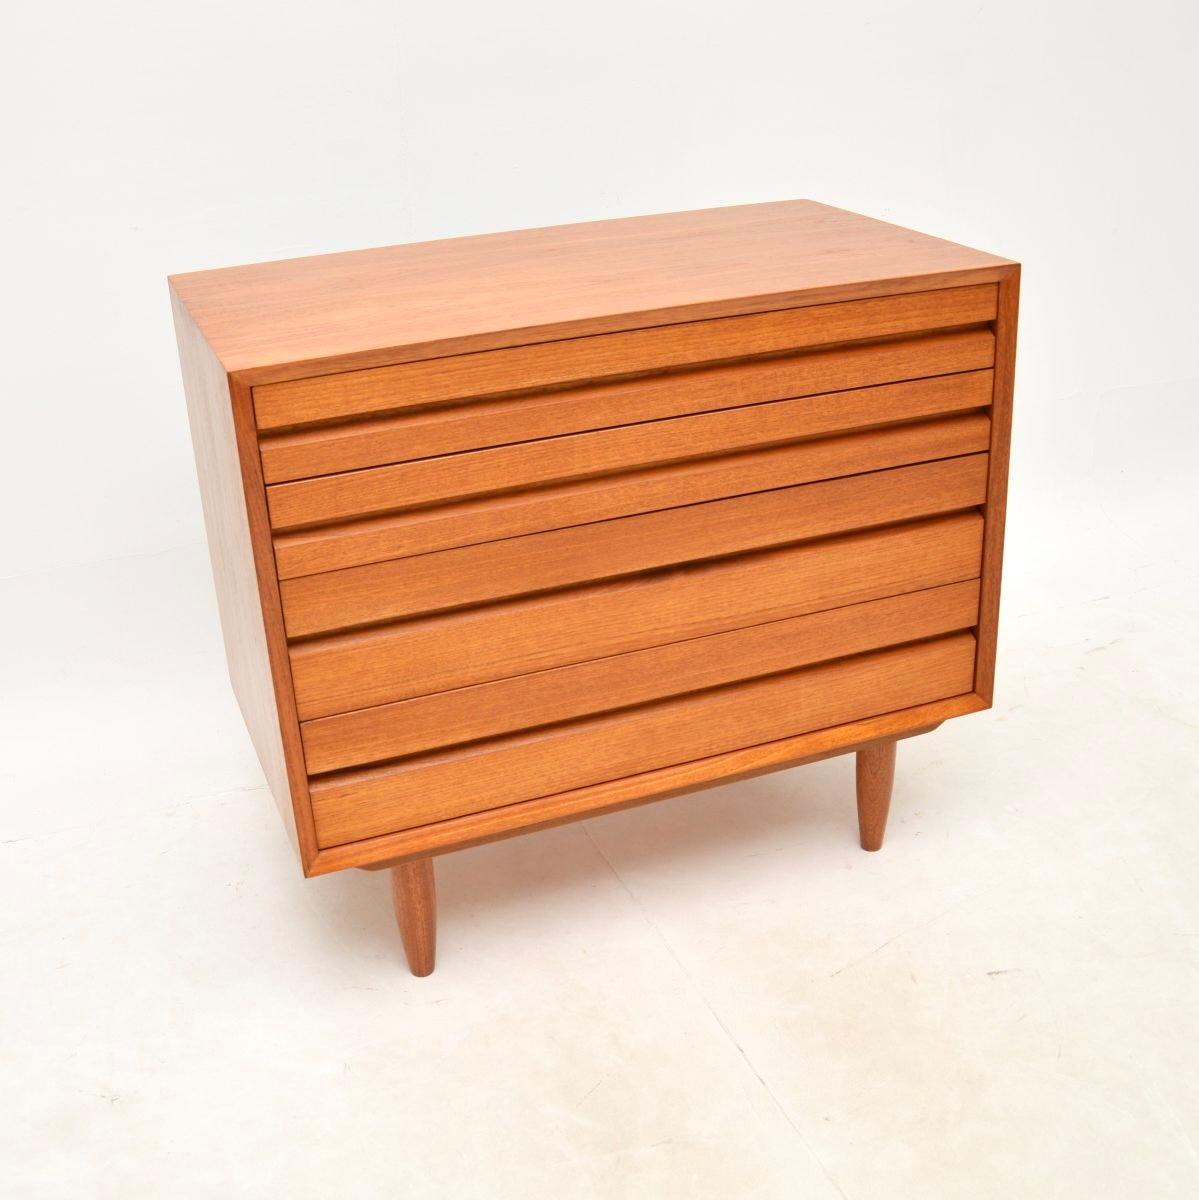 A superb vintage Danish teak chest of drawers by Poul Cadovius. It was made in Denmark by Cado, it dates from the 1960’s.

The quality is outstanding, this is so well made and is a very useful size. The teak has a gorgeous colour and lovely grain